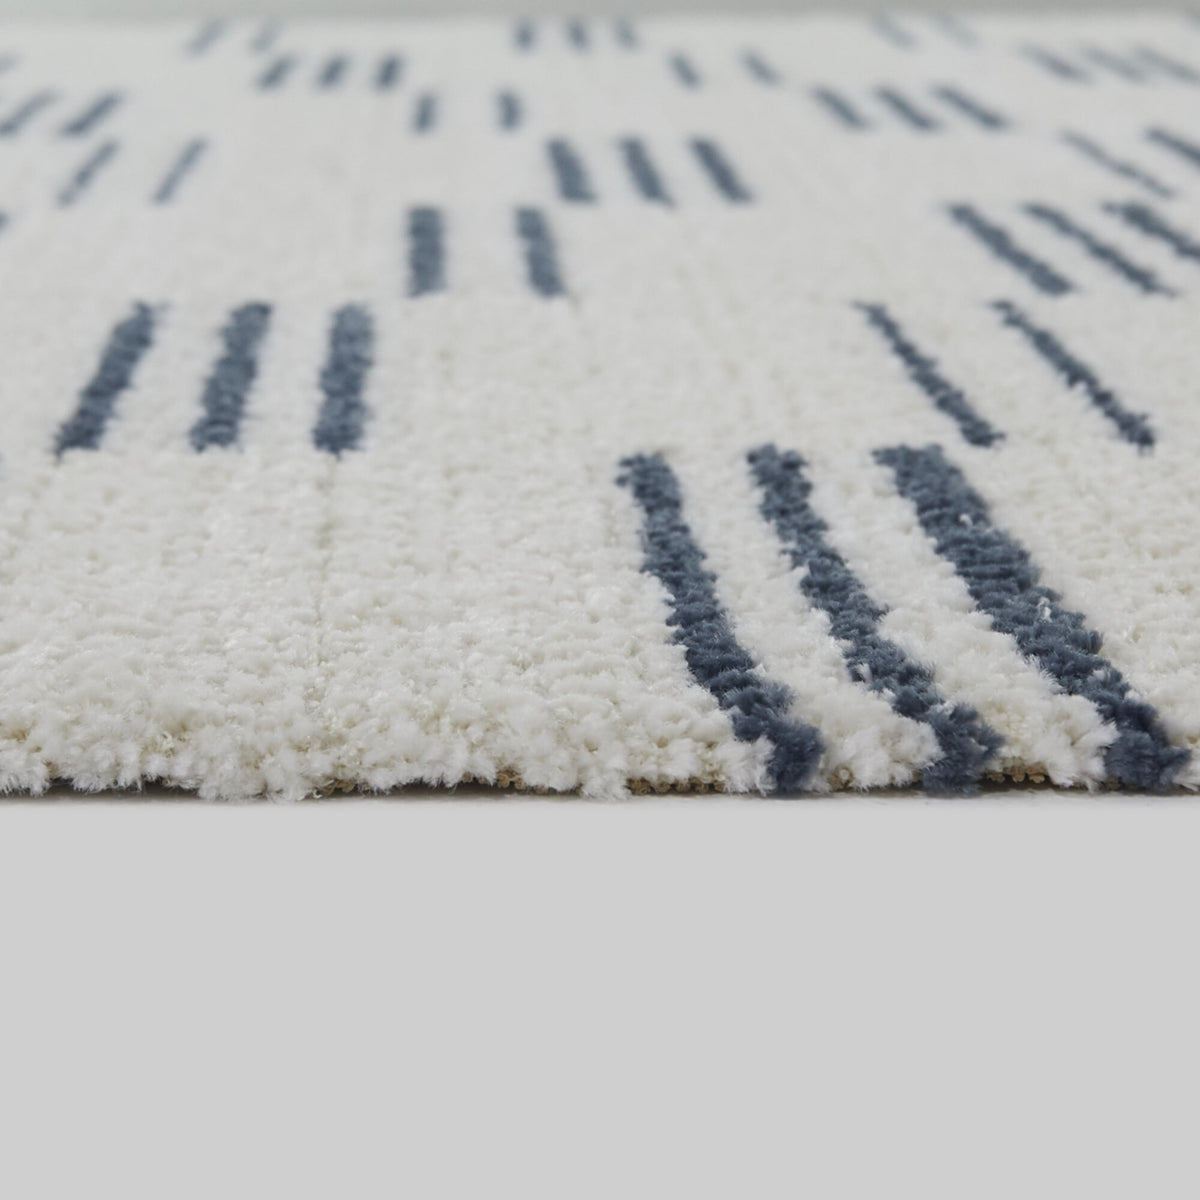 Marien Abstract Striped Area Rug